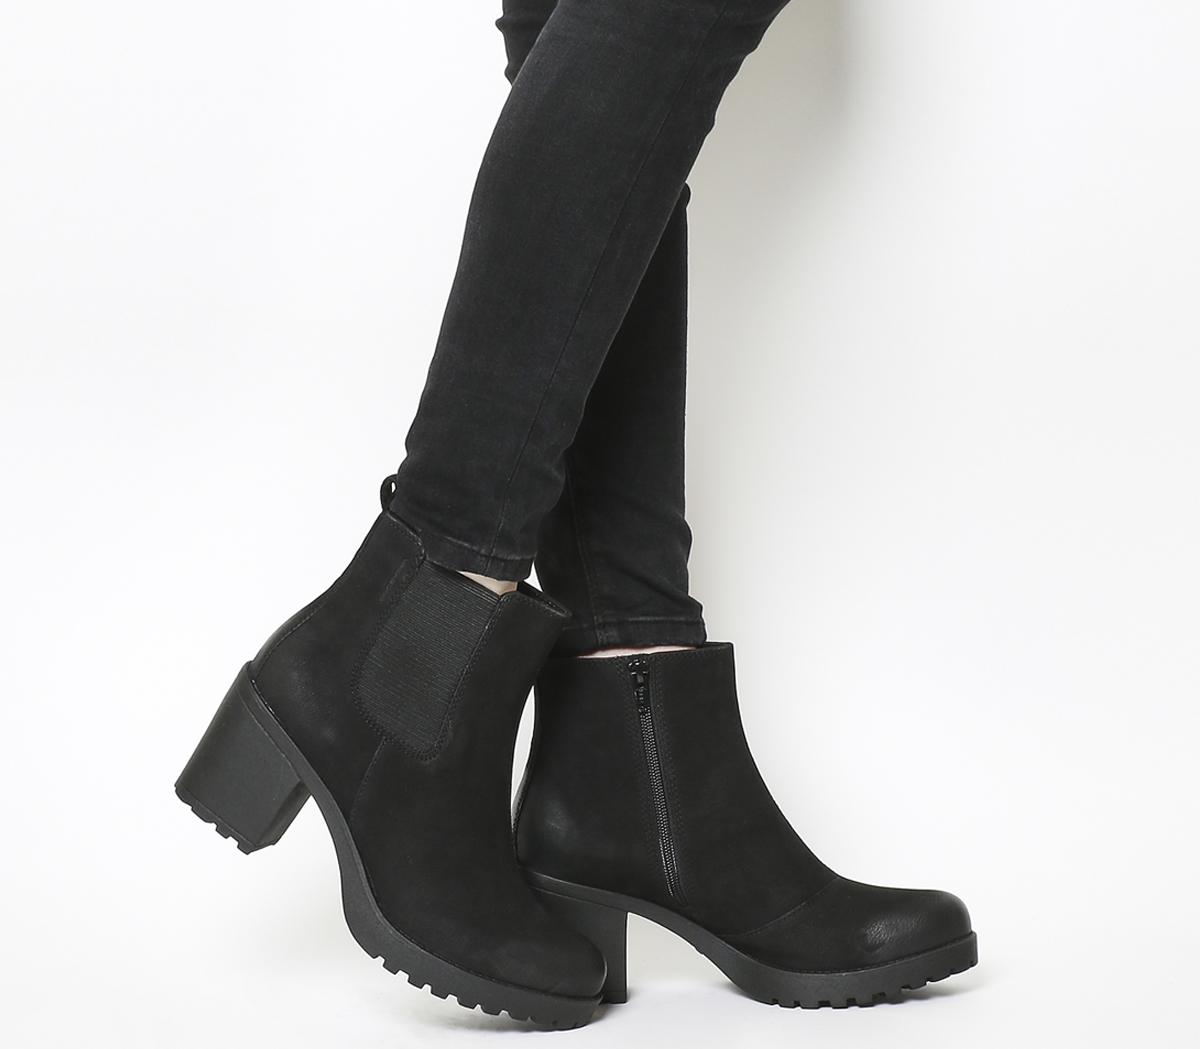 vagabond grace chunky leather ankle boot